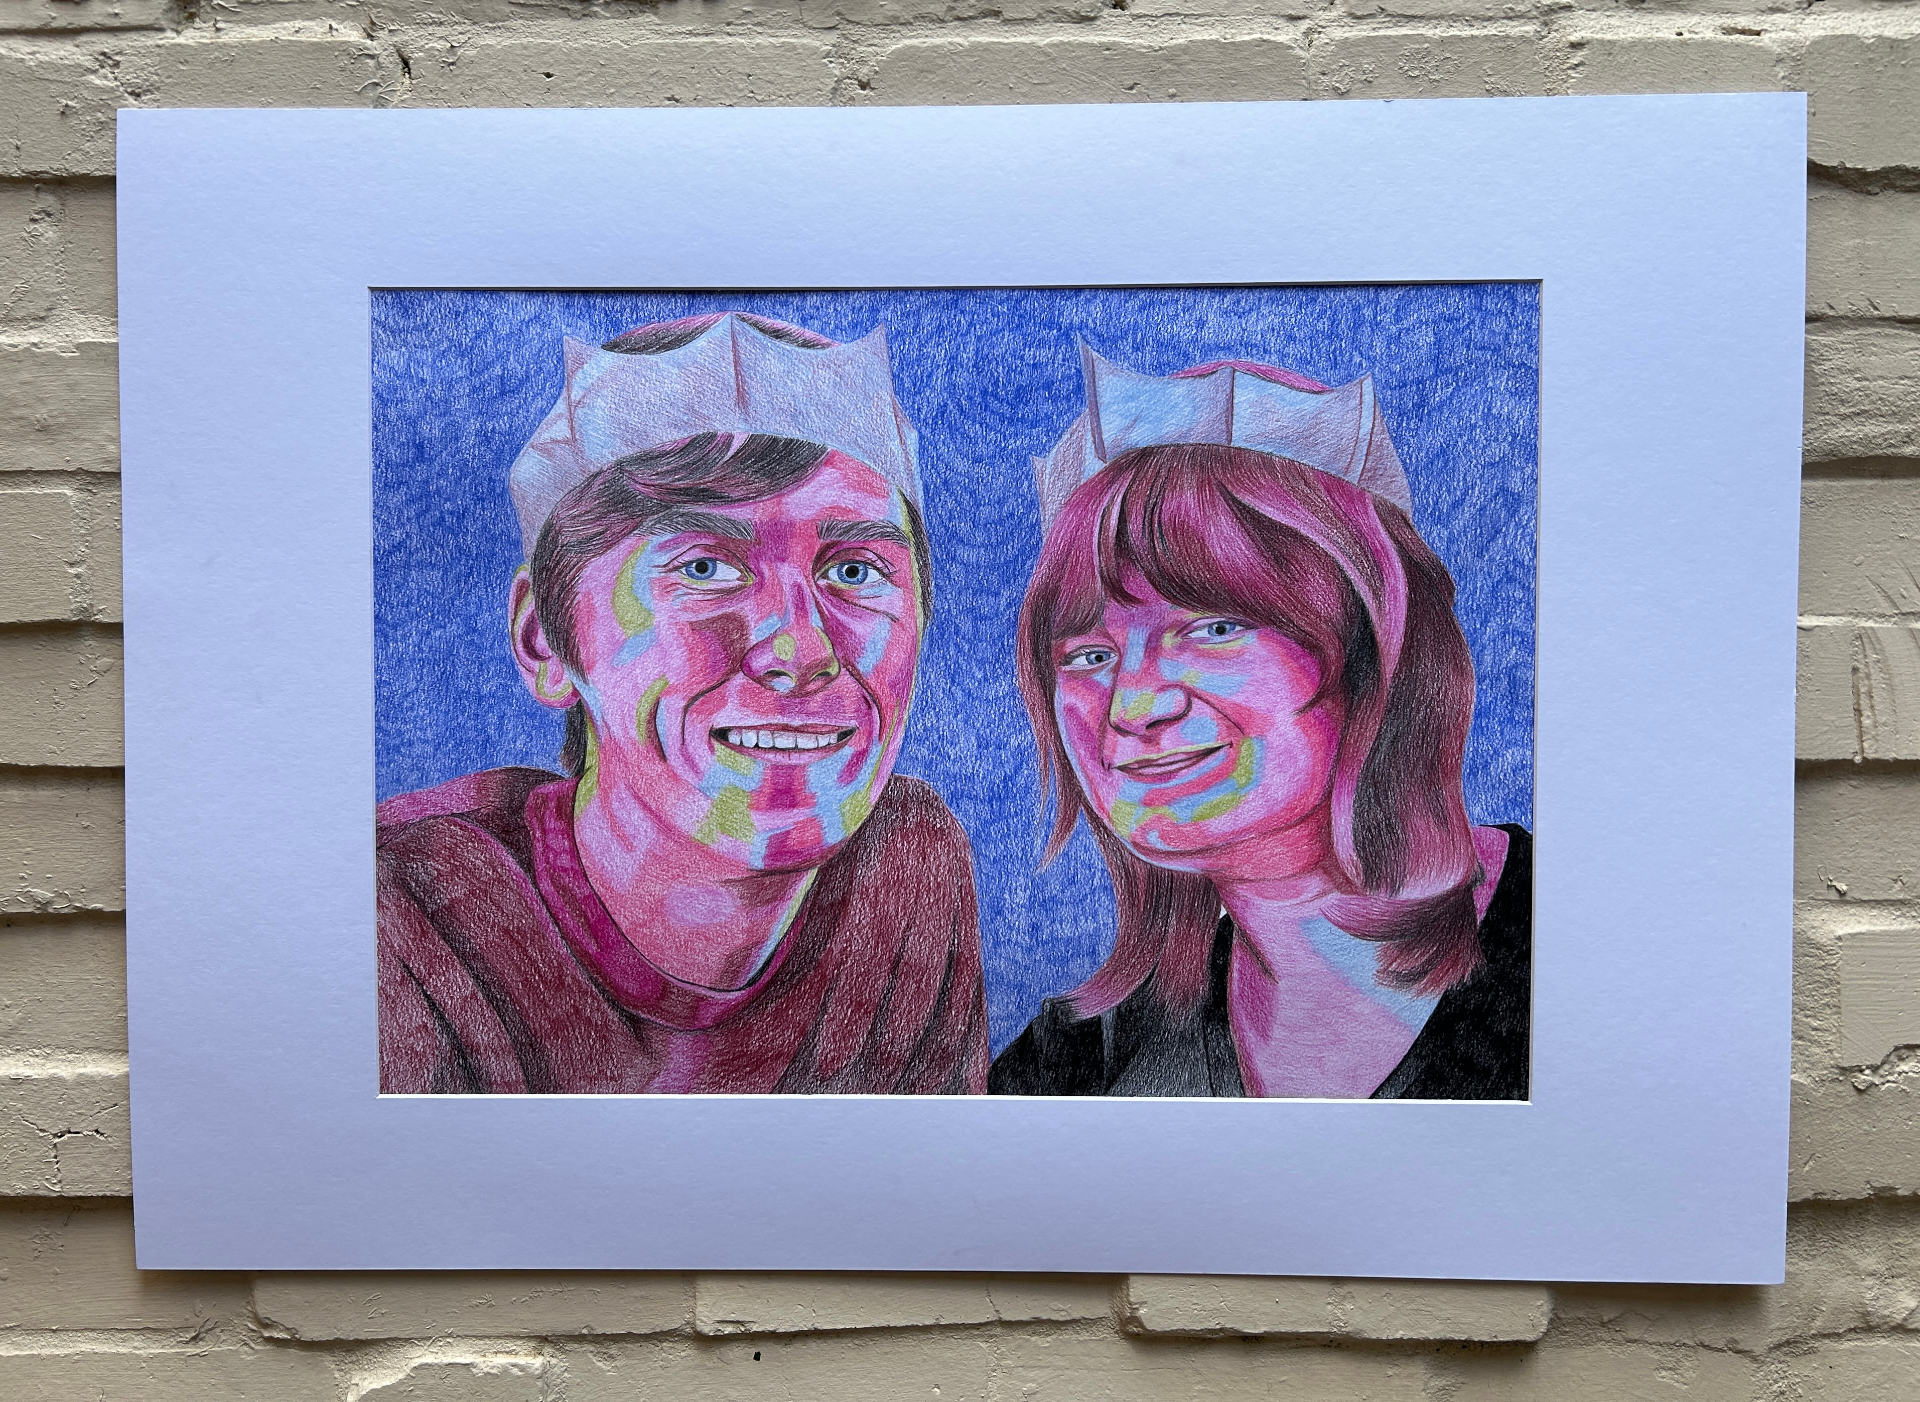 Illustrated portrait of man and woman wearing party hats